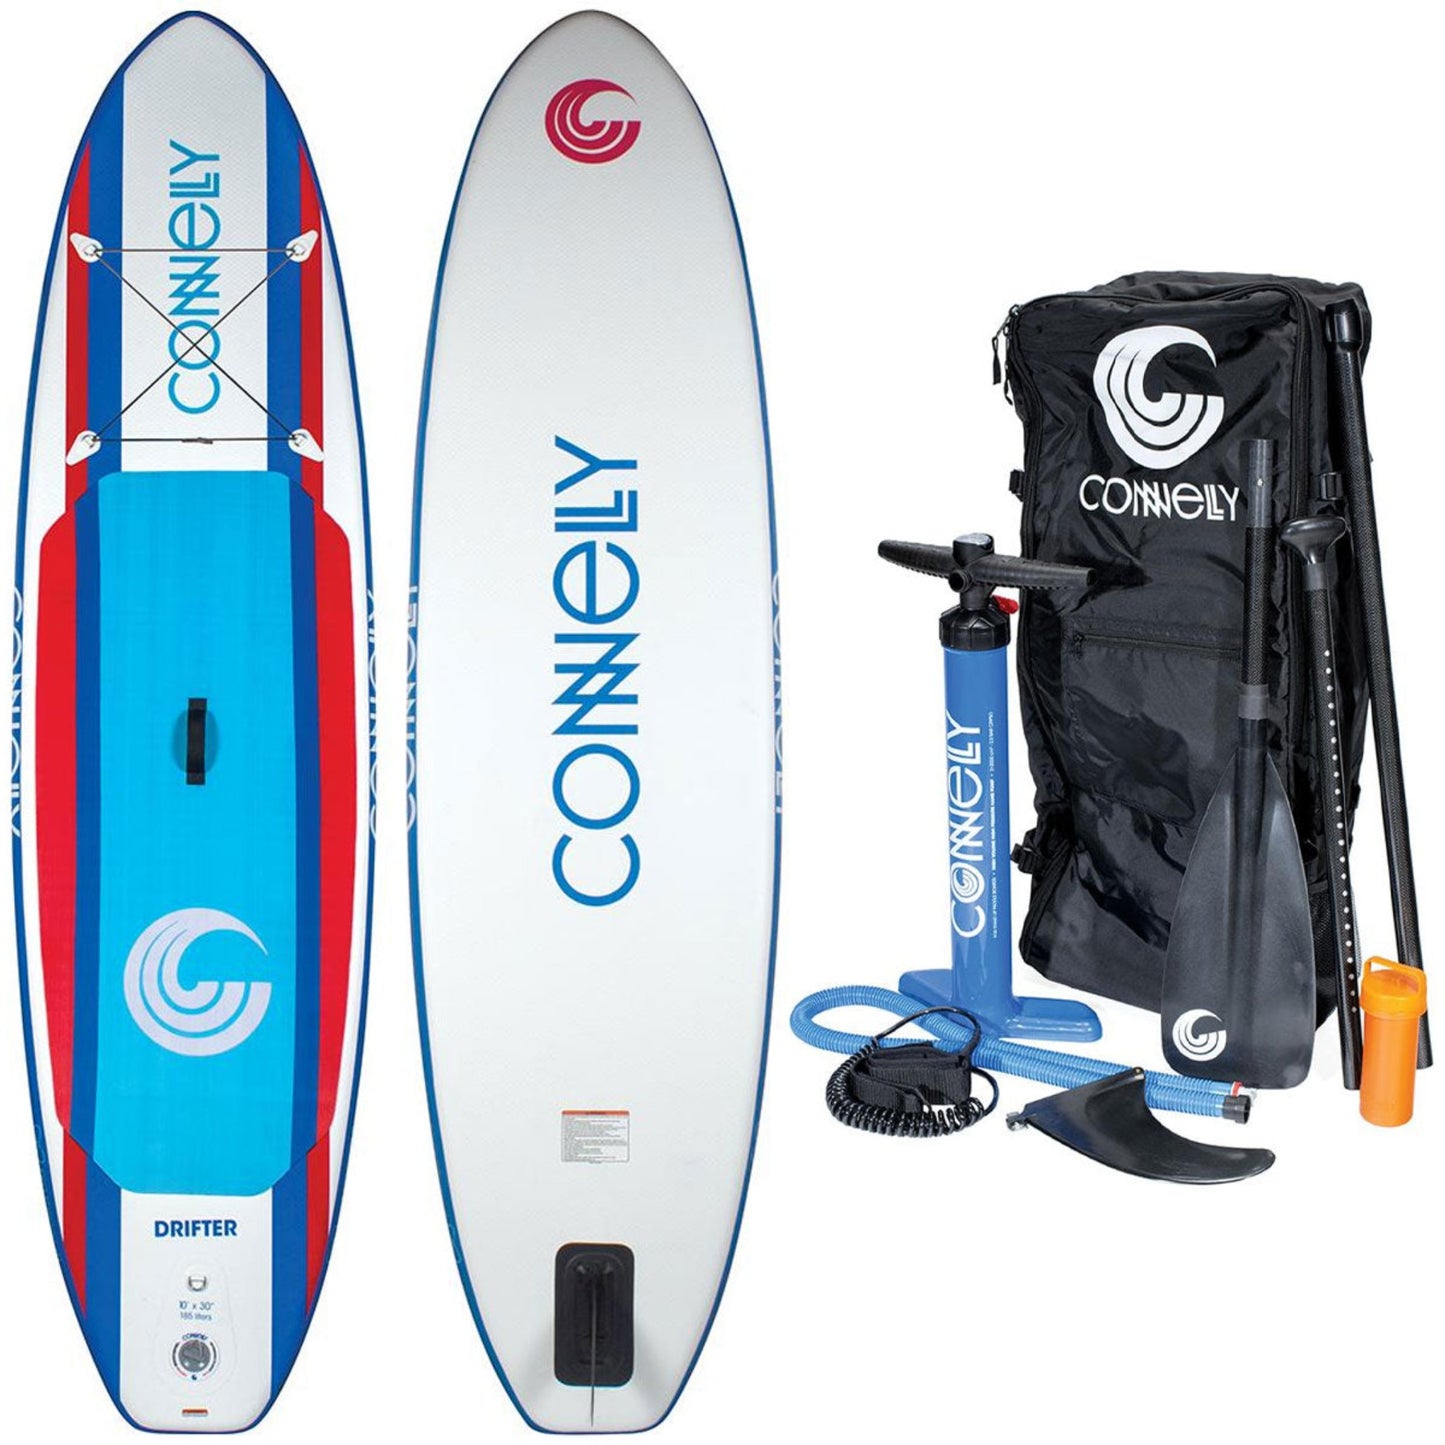 Connelly Drifter 10' Inflatable Standup Paddleboard